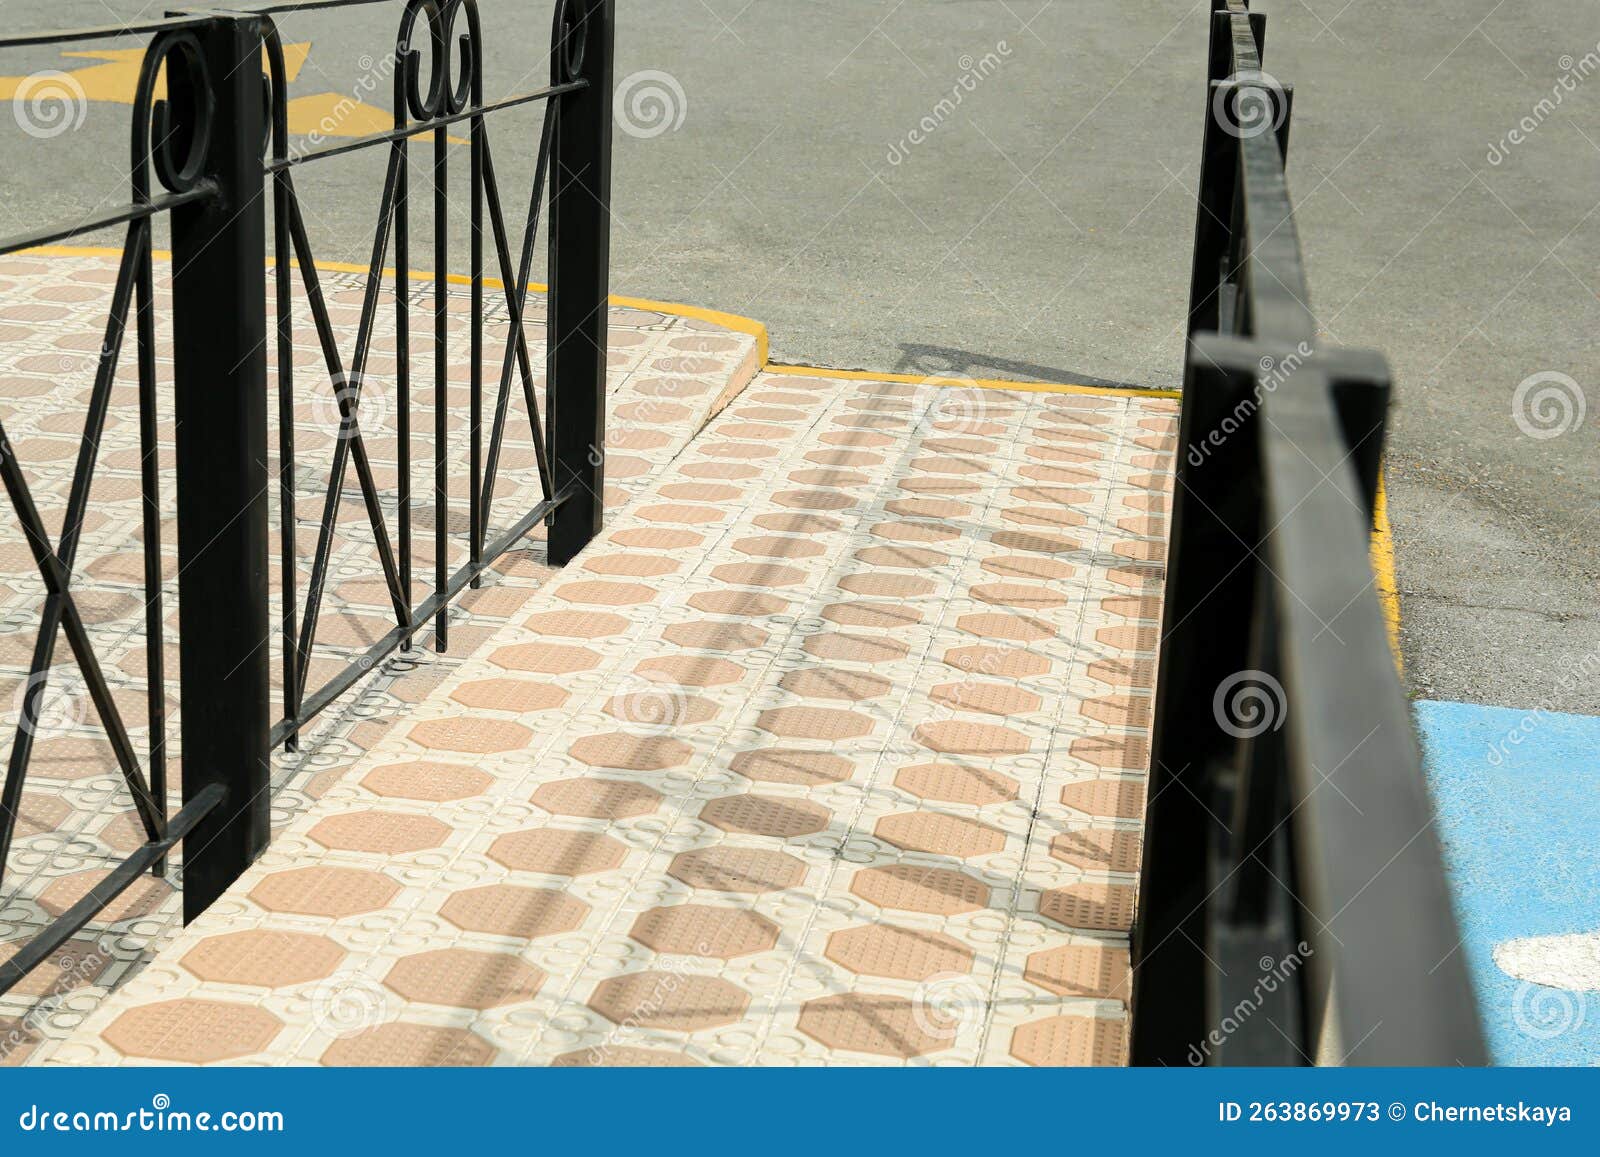 Tiled Ramp with Black Metal Railings Outdoors Stock Image - Image of ...